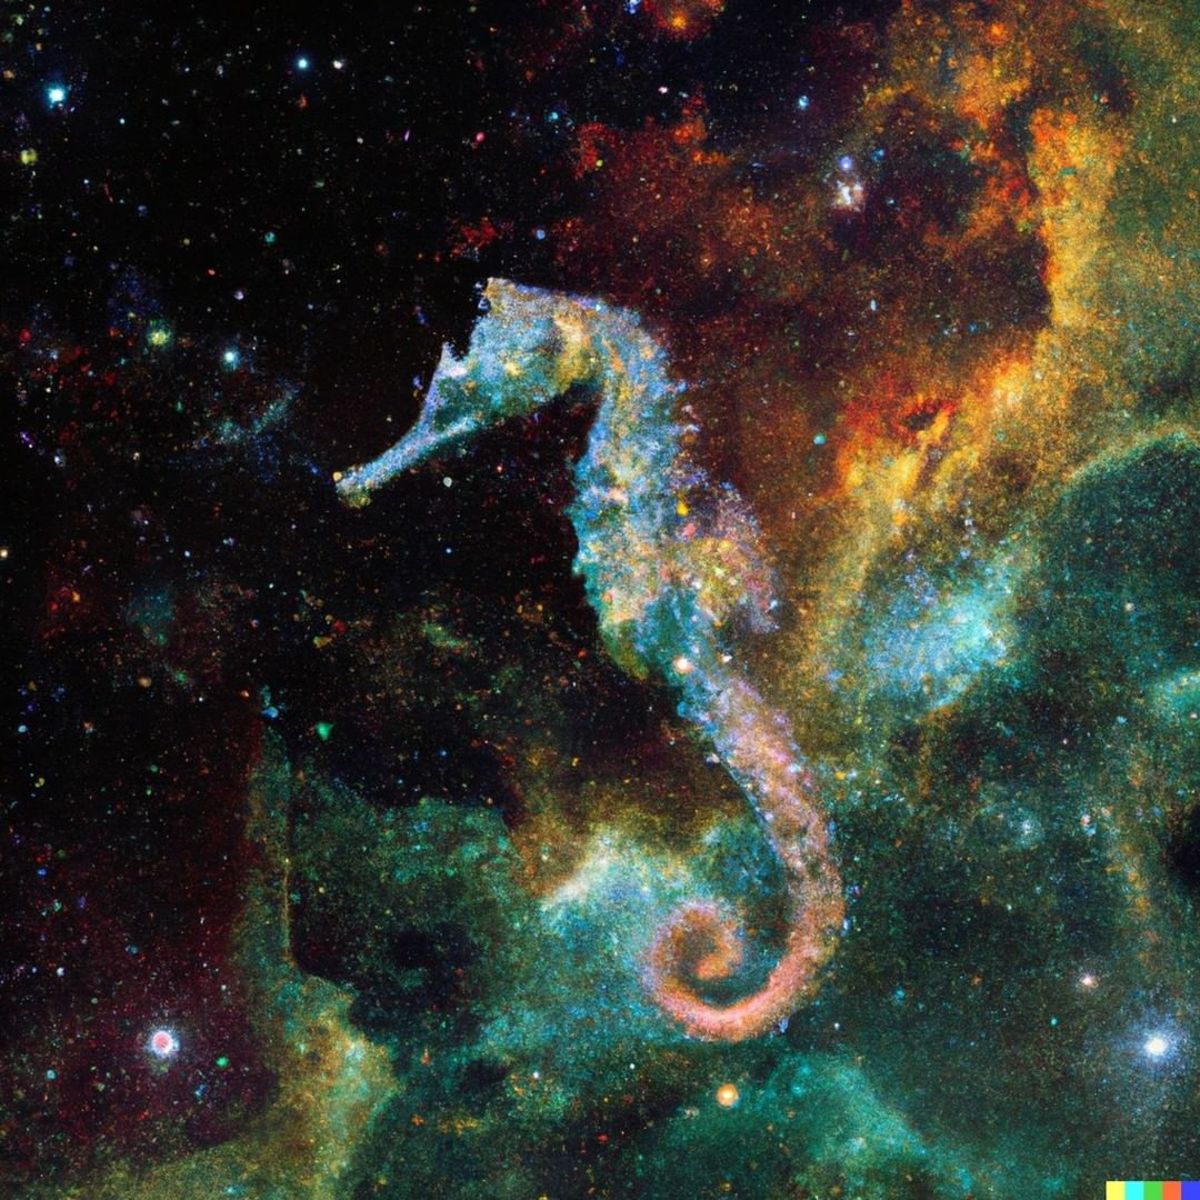 A nebula shaped like a sea-horse (Actual text prompt used)